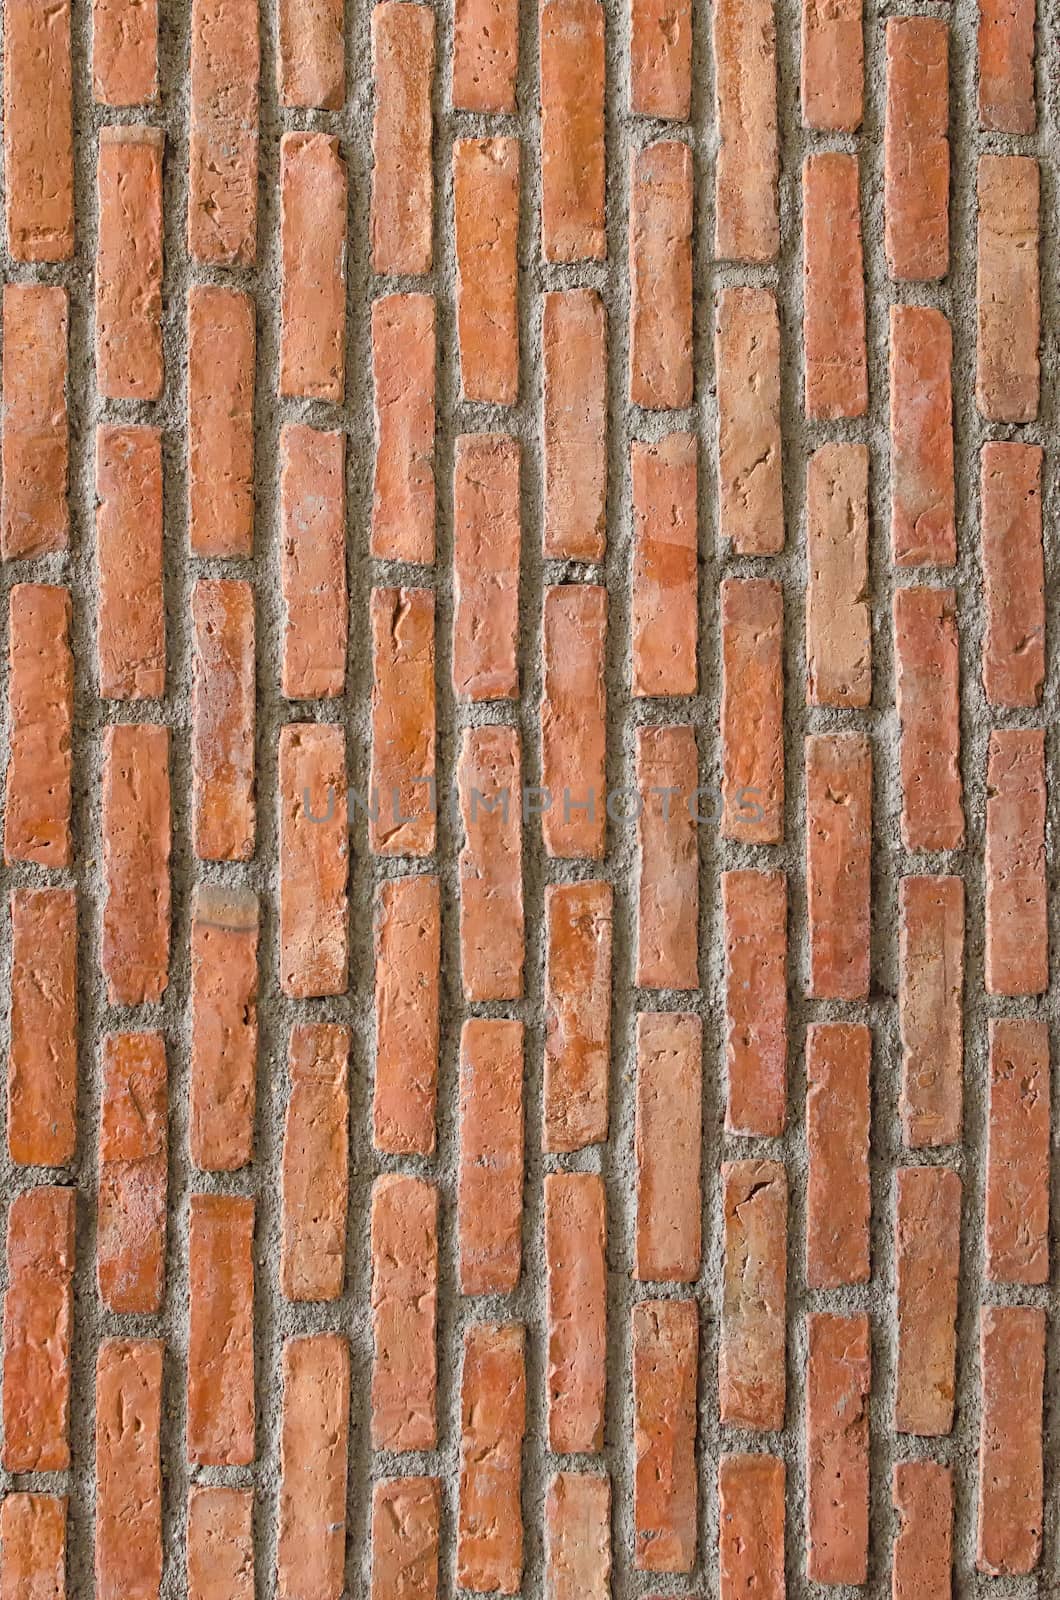 Background of brick wall texture by nopparats